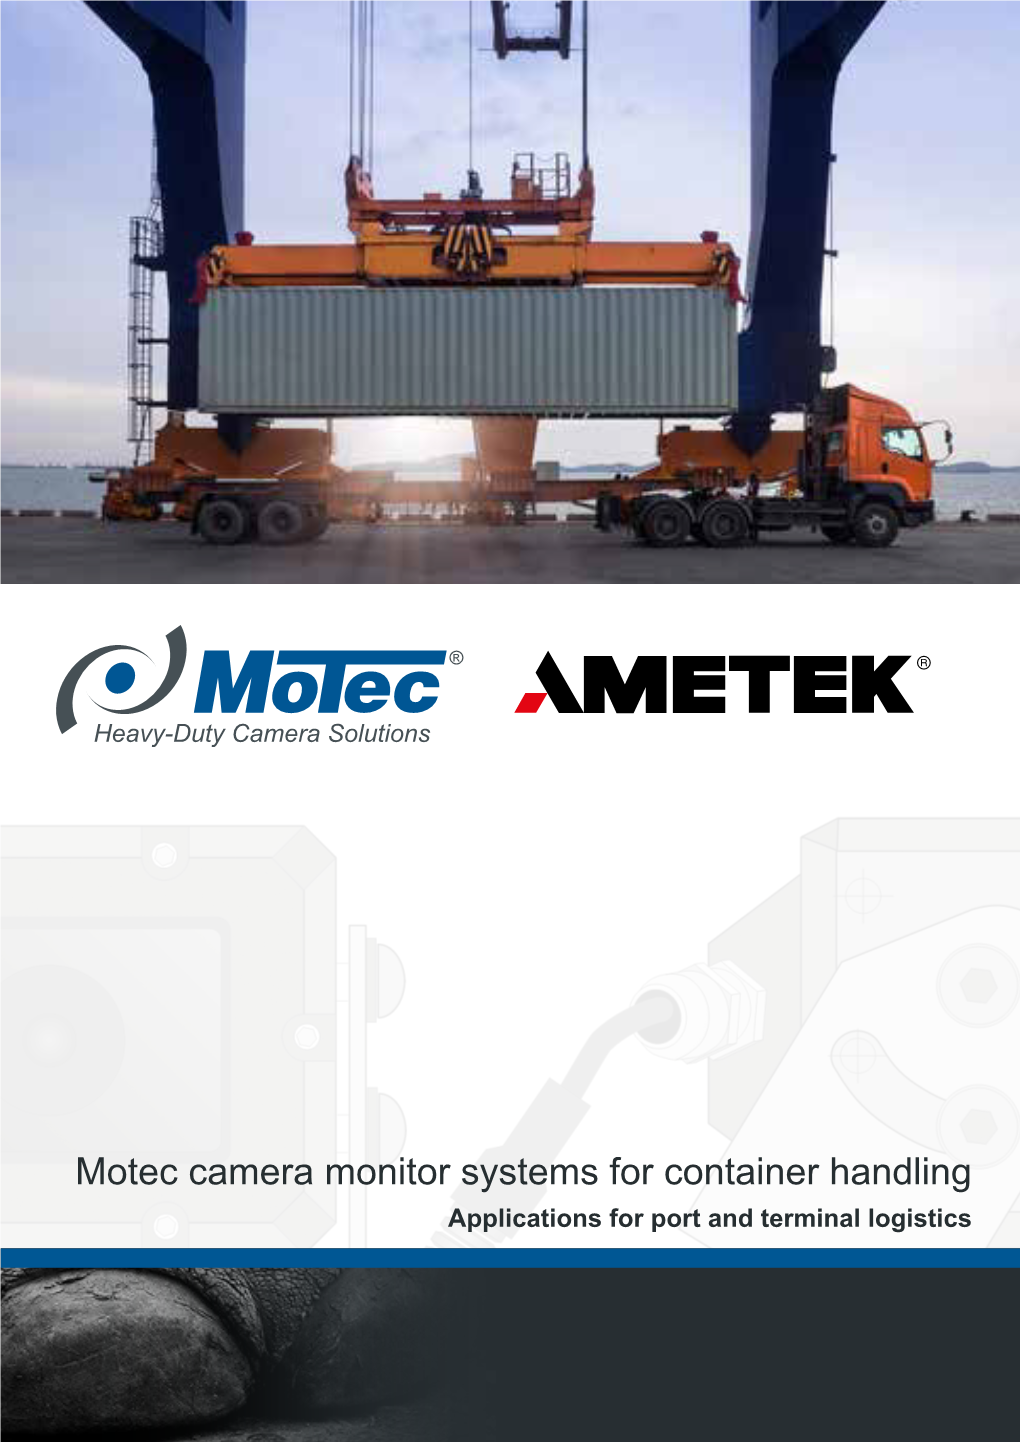 Motec Camera Monitor Systems for Container Handling